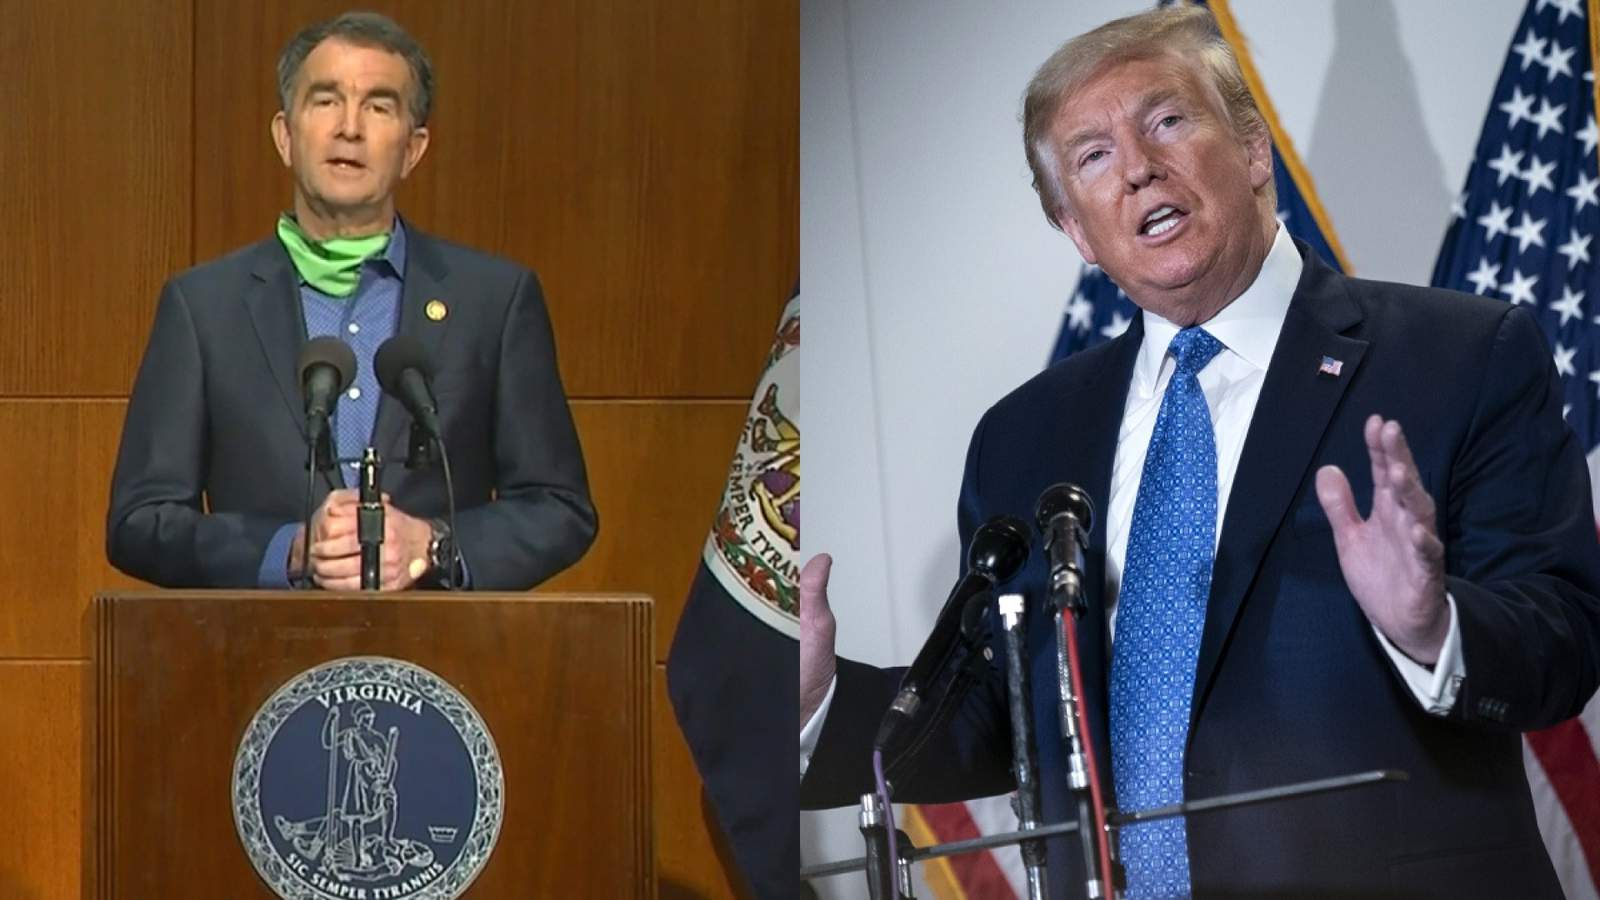 ’The sooner he is out, the better’ tweets Virginia Gov. Ralph Northam on President Trump